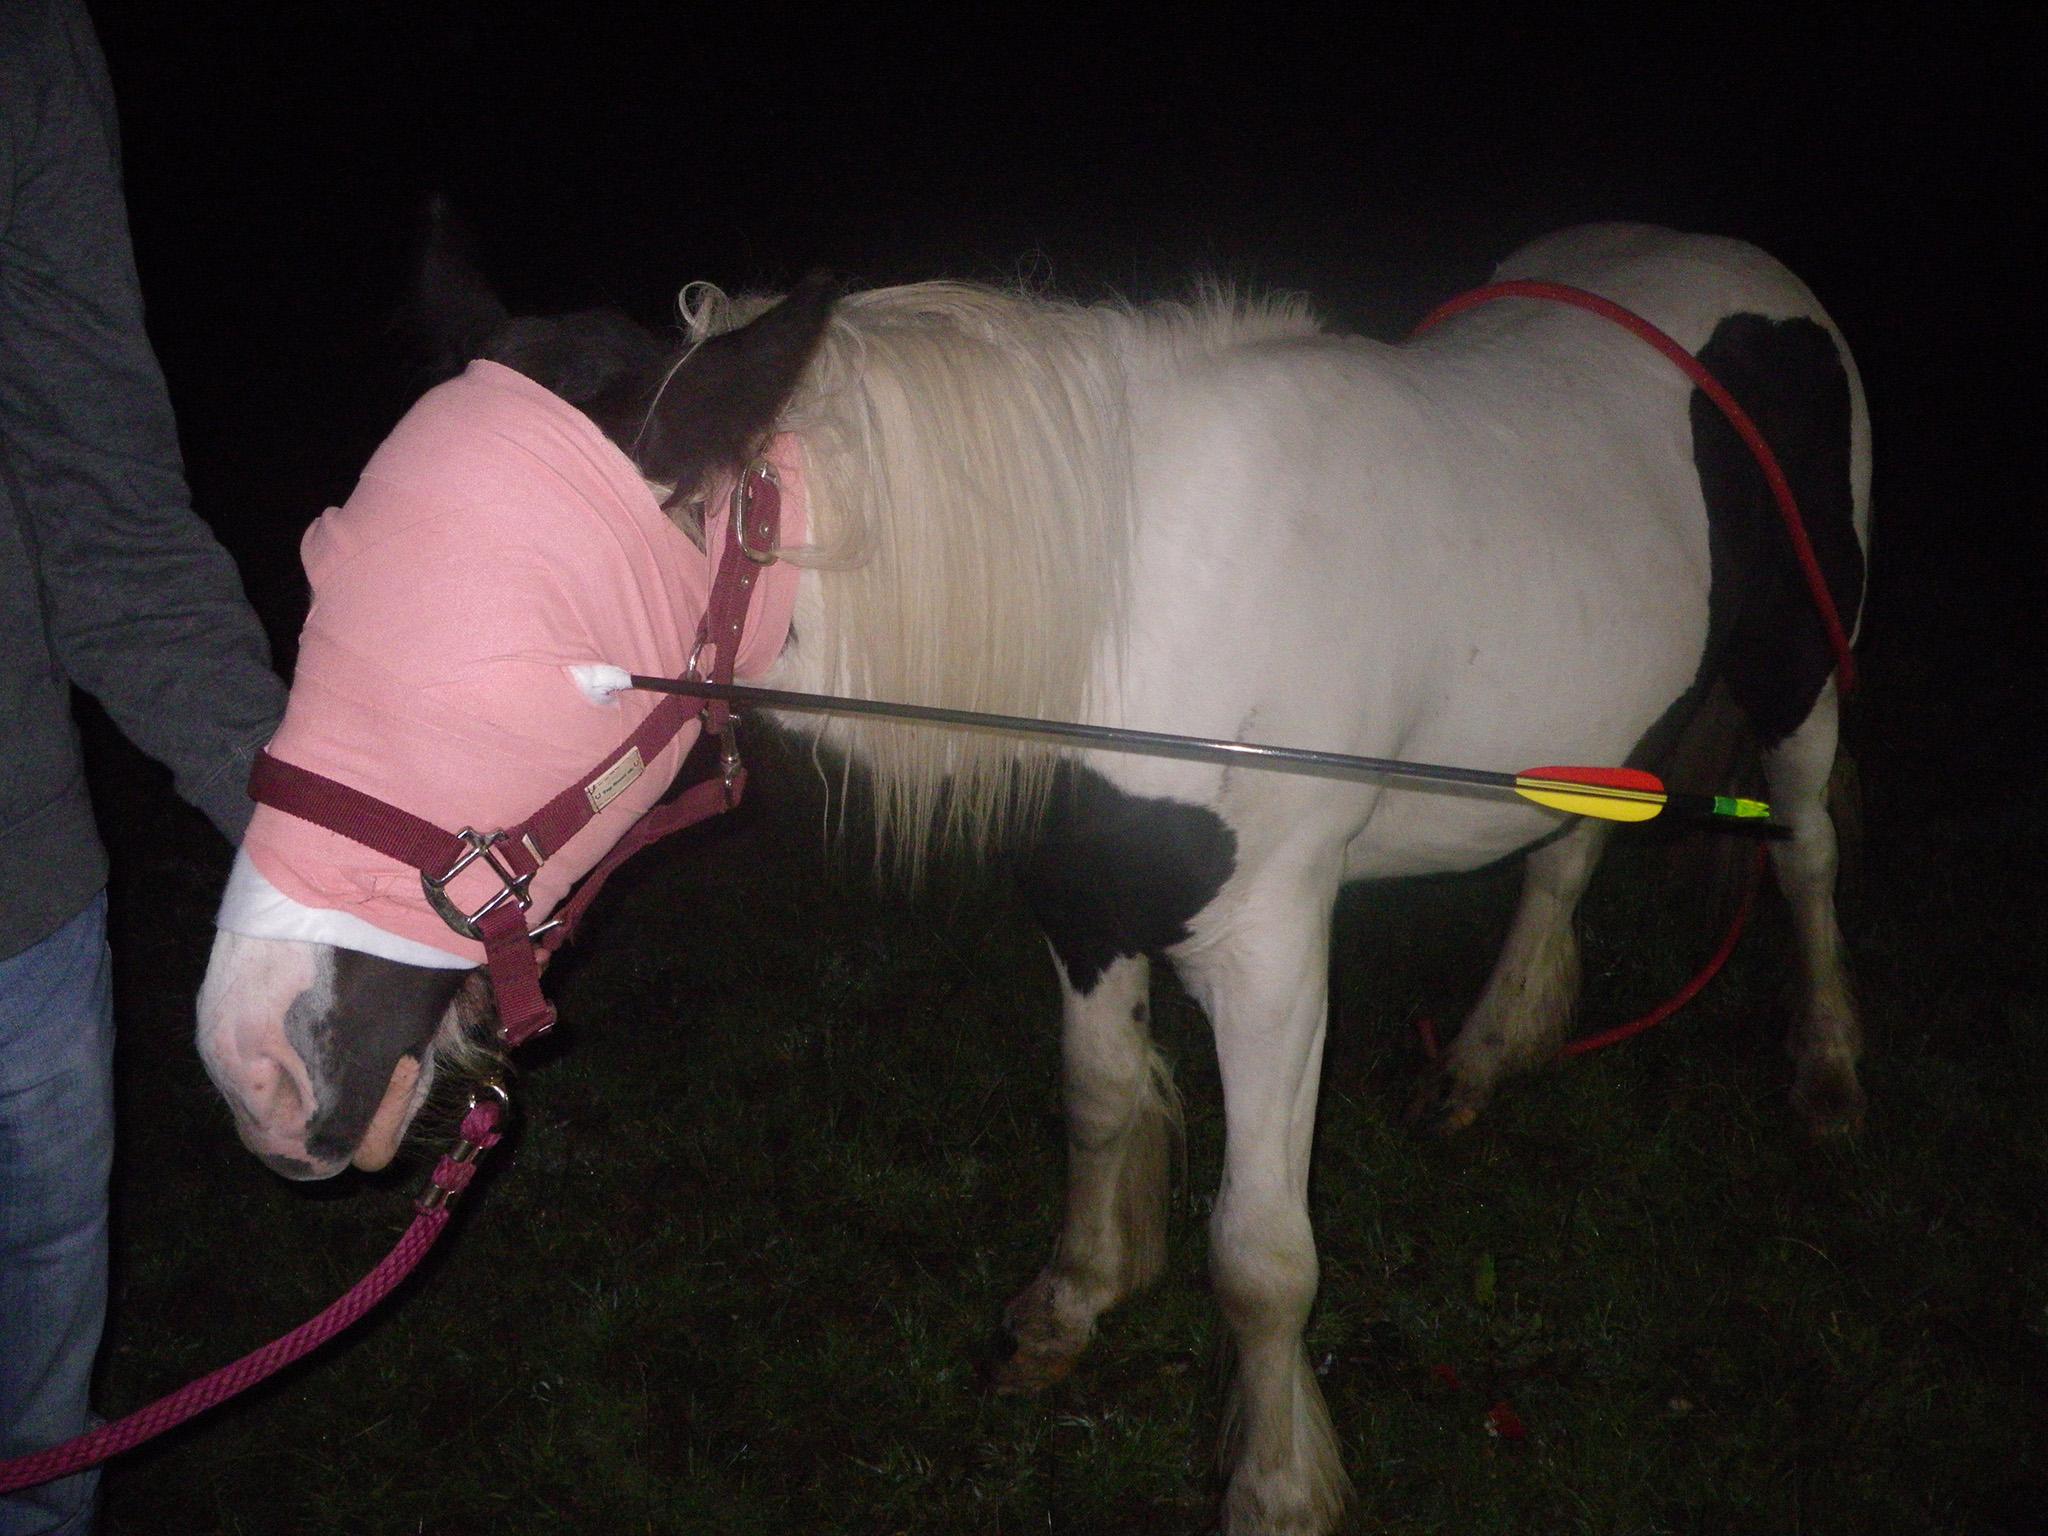 Widget the horse is expected to recover from the attack the RSPCA branded as 'wicked'.